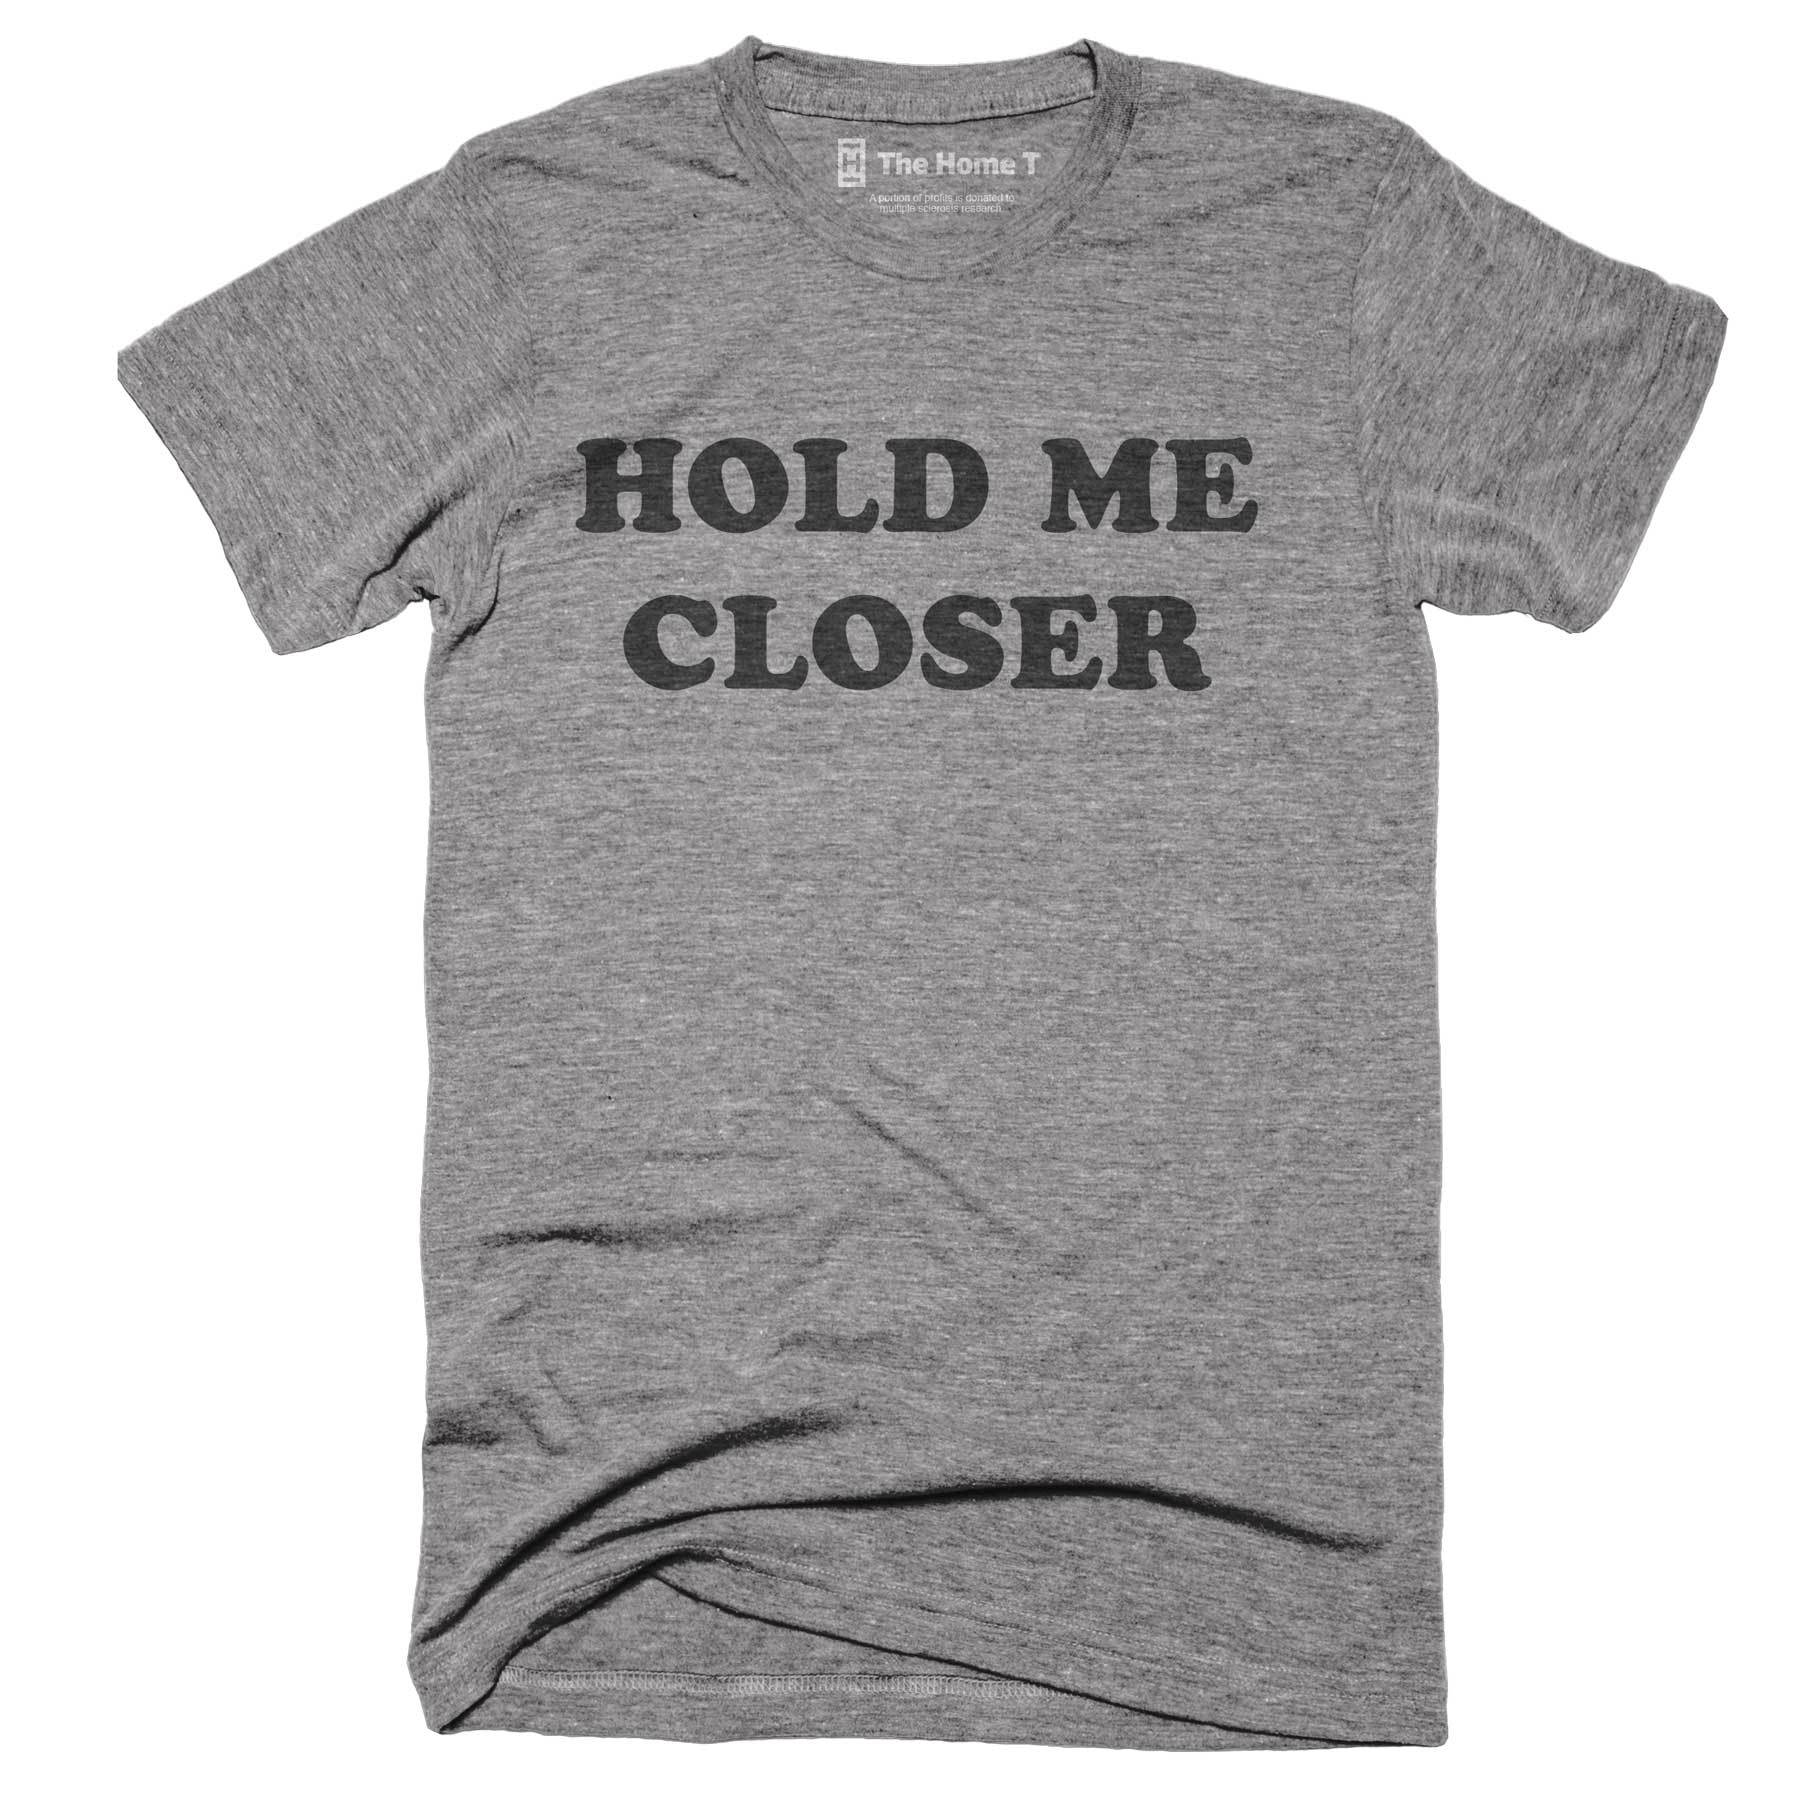 Hold Me Closer